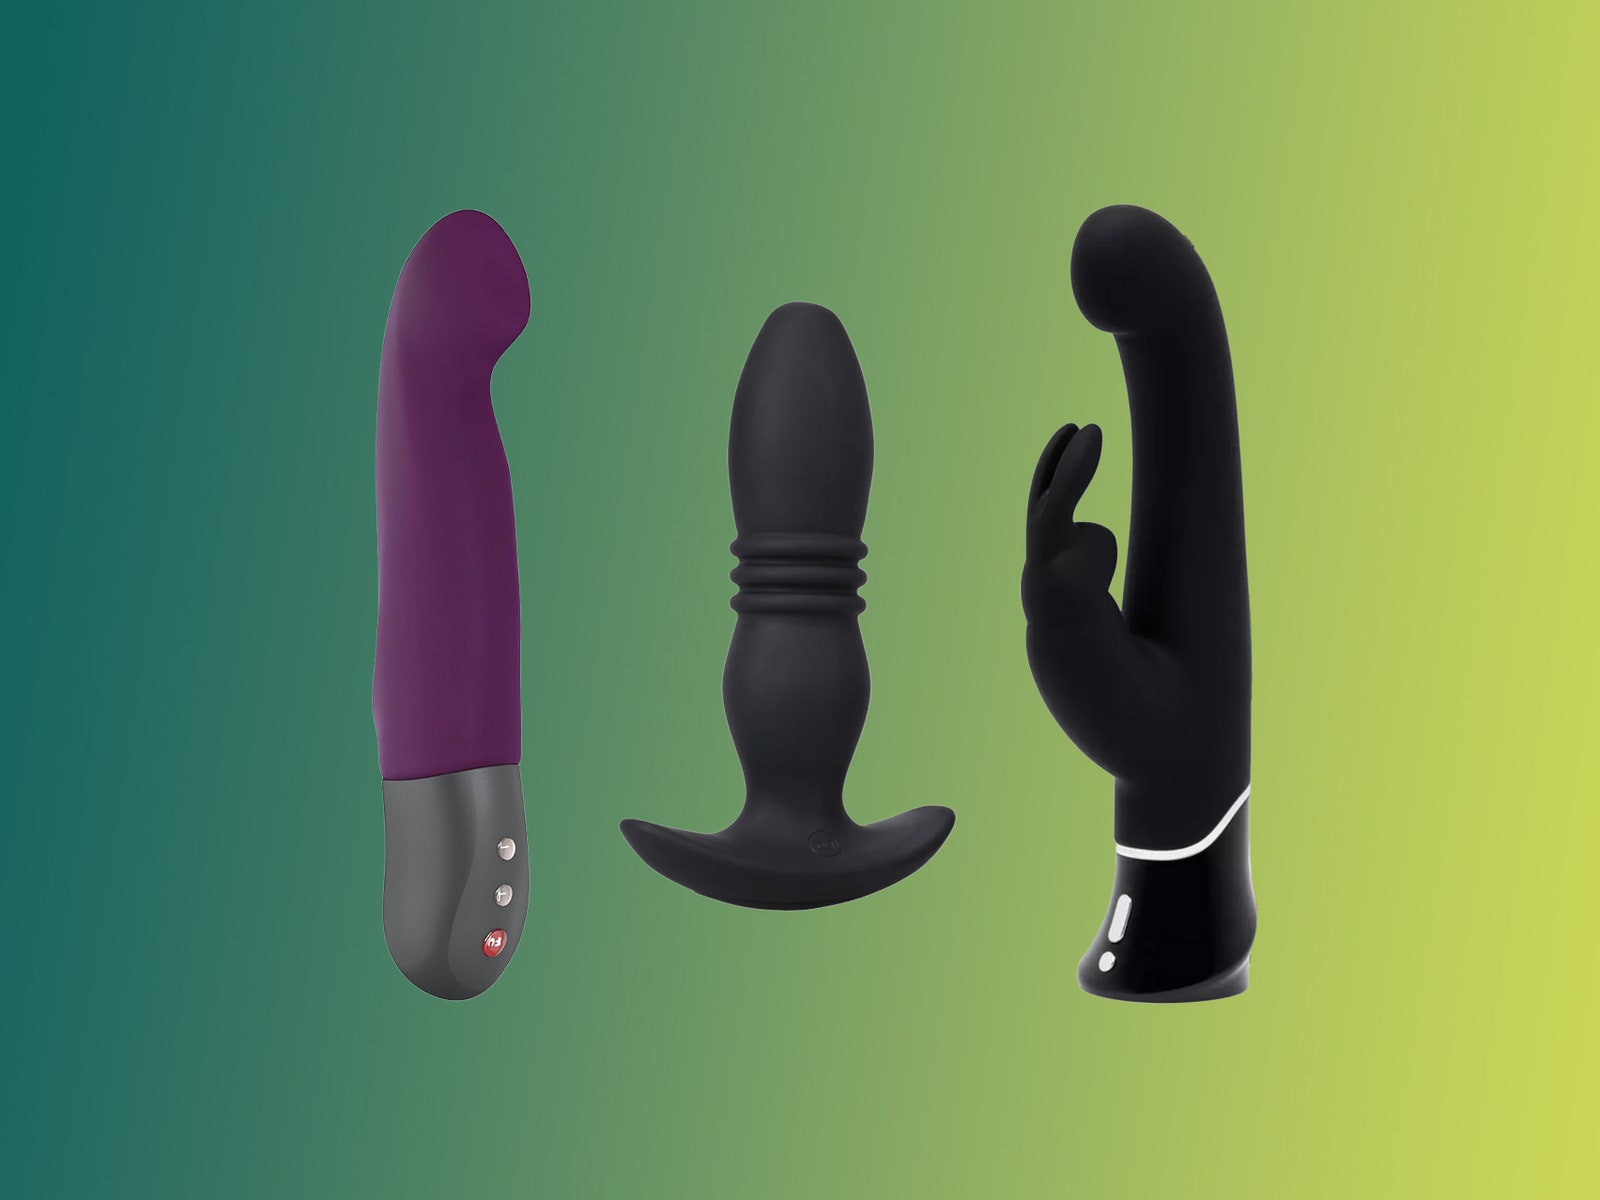 Lazy girls, rejoice: these thrusting dildos and vibrators do all the work for you